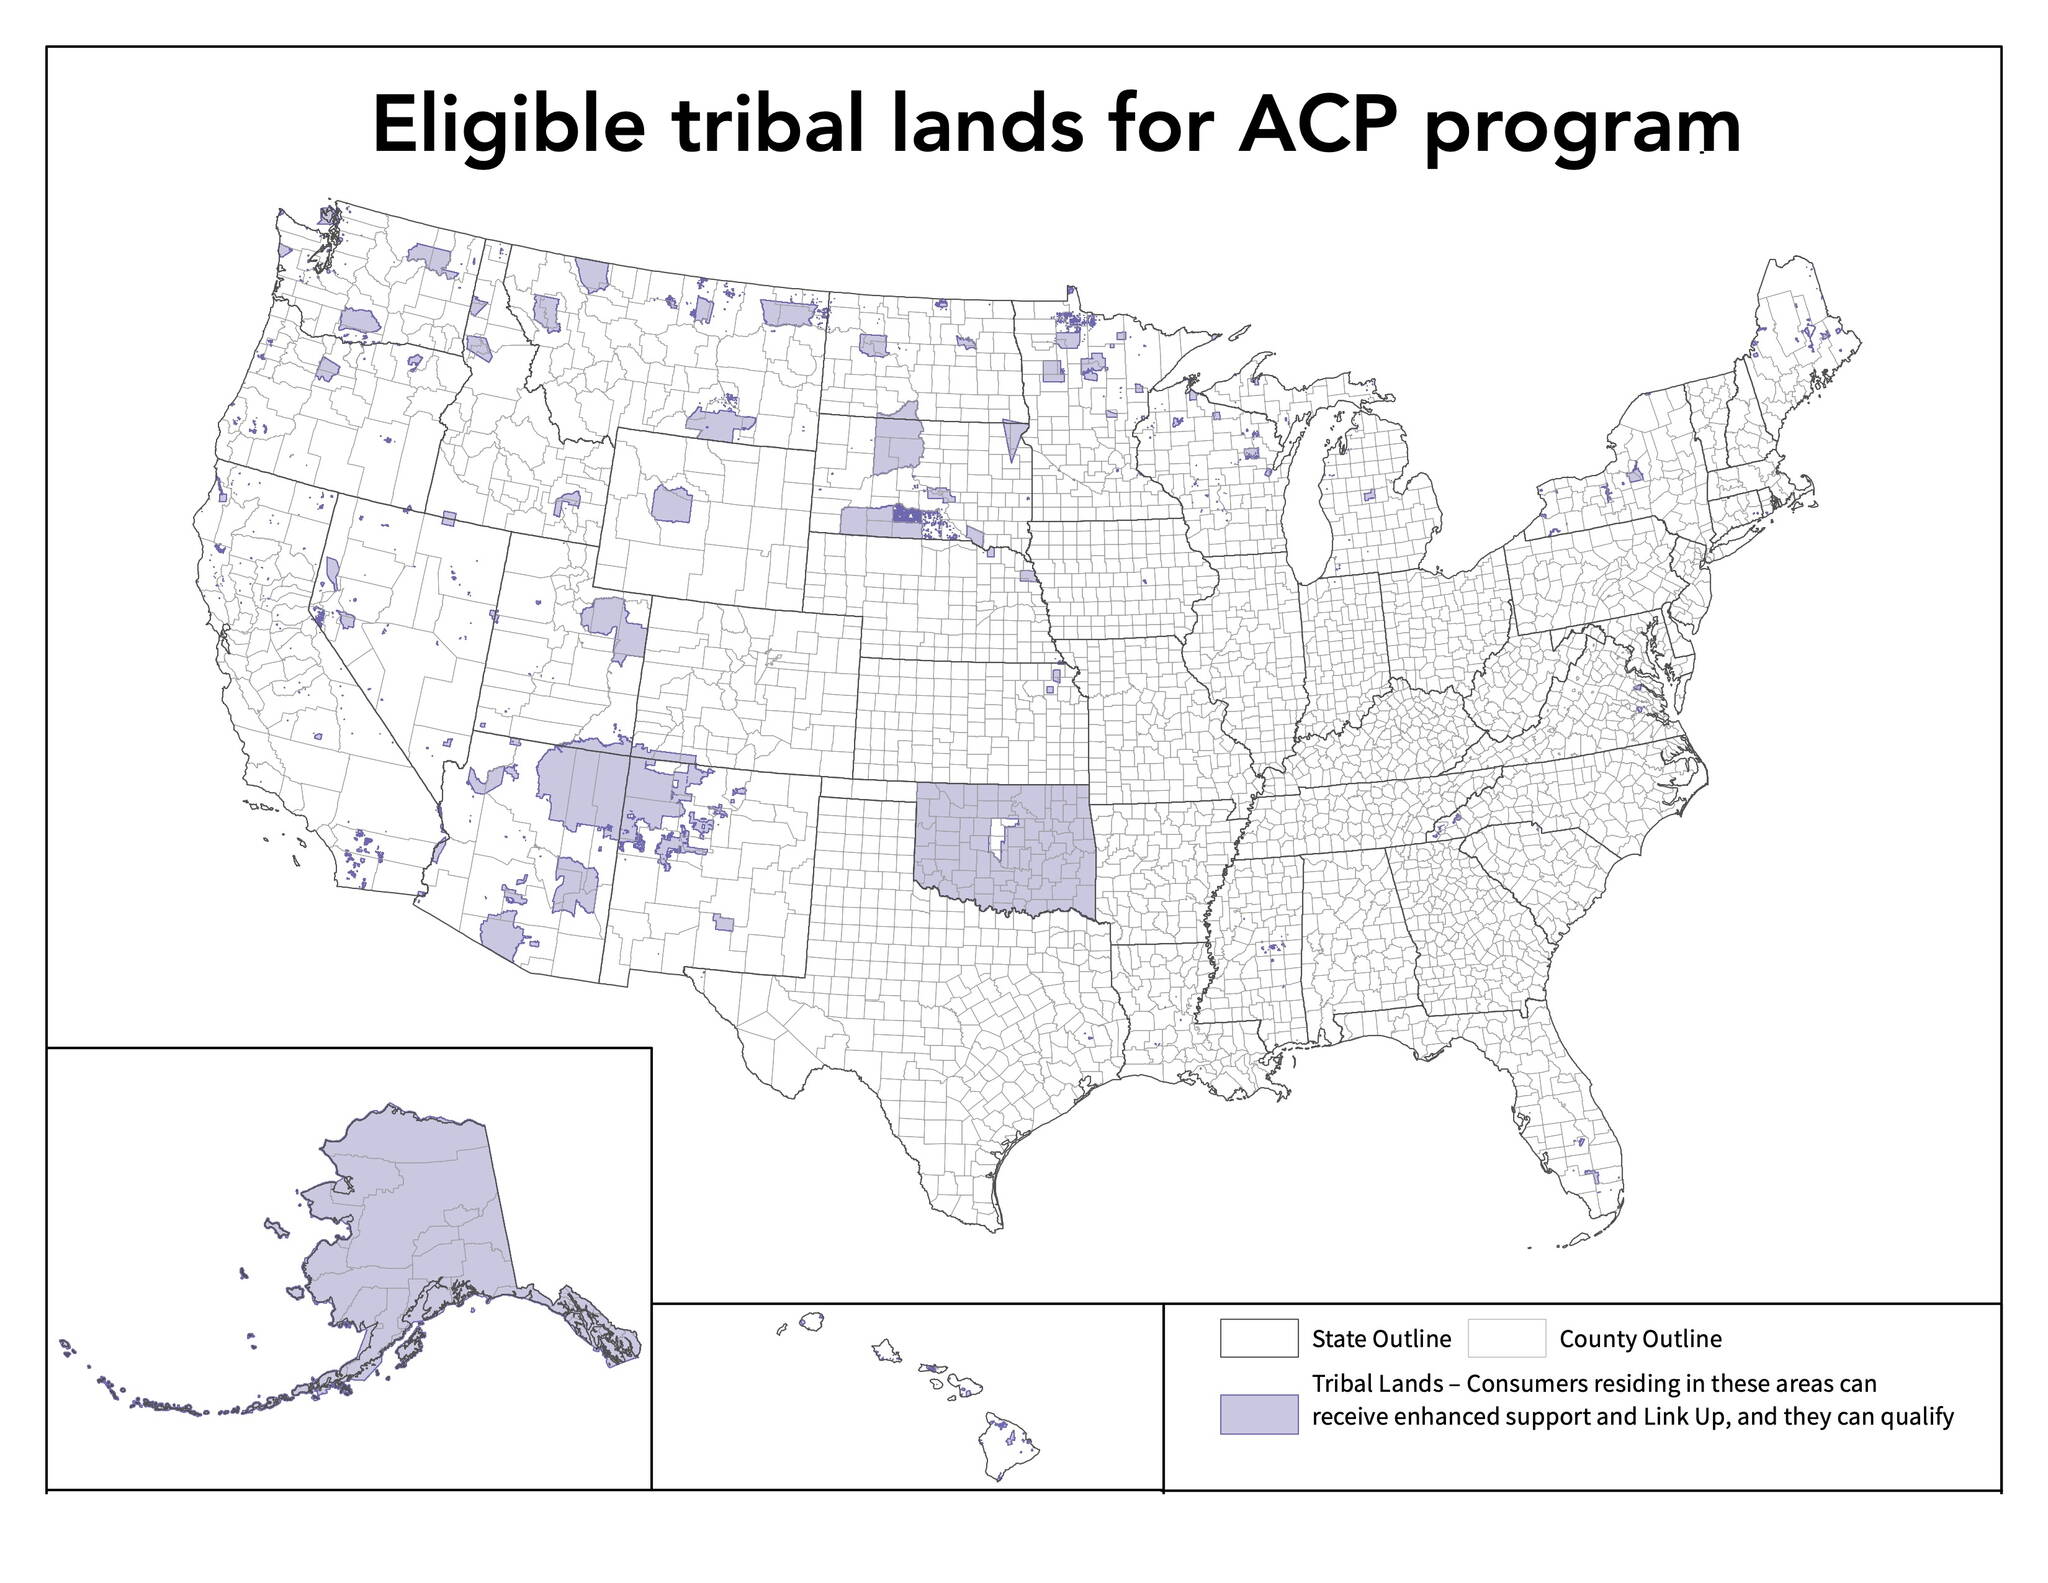 A map shows locations in the U.S. designated as tribal lands and thus eligible for higher benefits from the Affordable Connectivity Program. All of Alaska falls under that designation. (Map courtesy of the FCC)